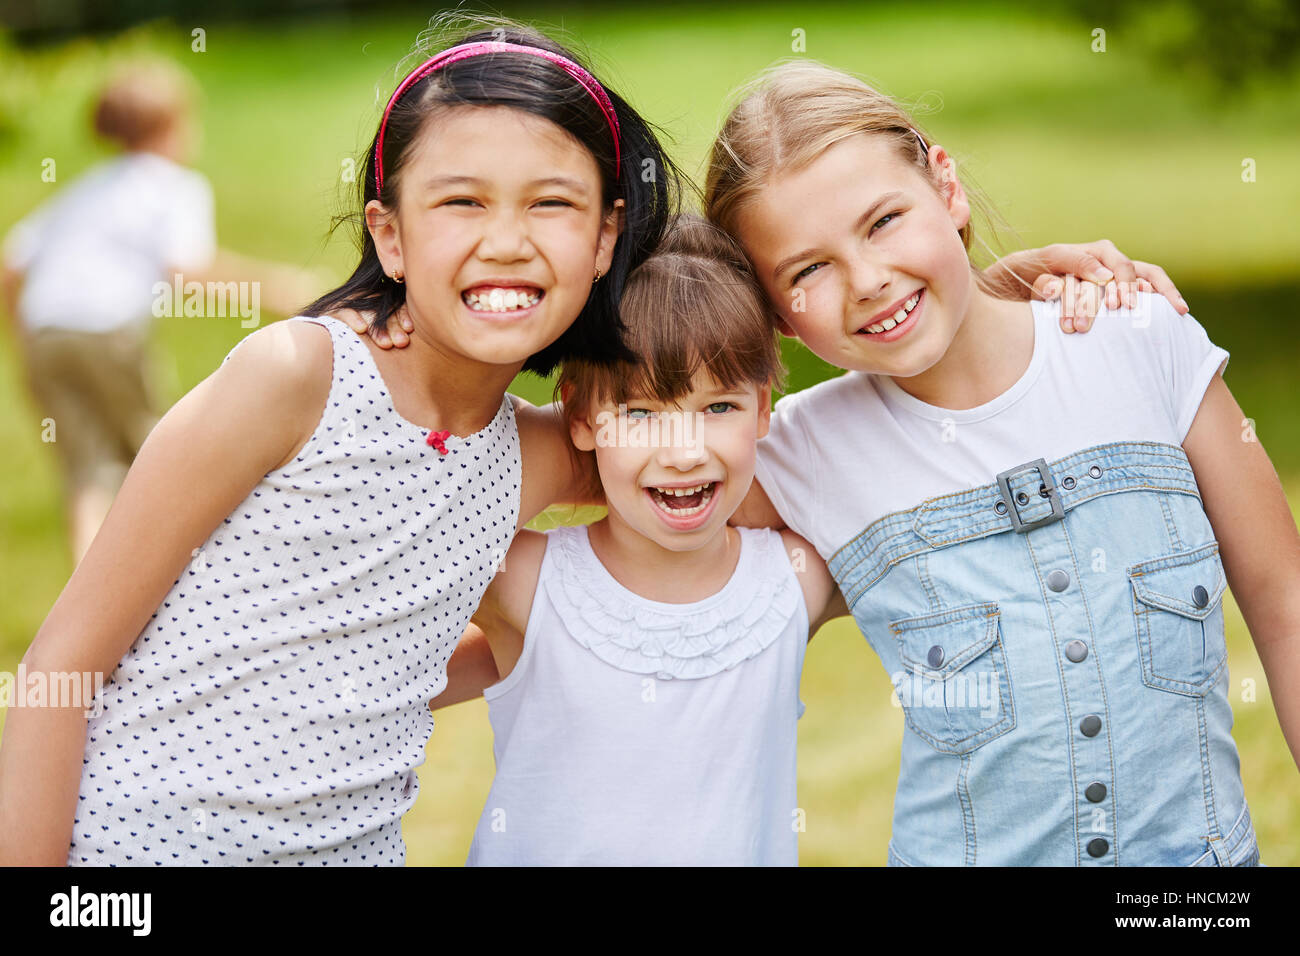 Three laughing girls as friends in intercultural happy team portrait Stock Photo